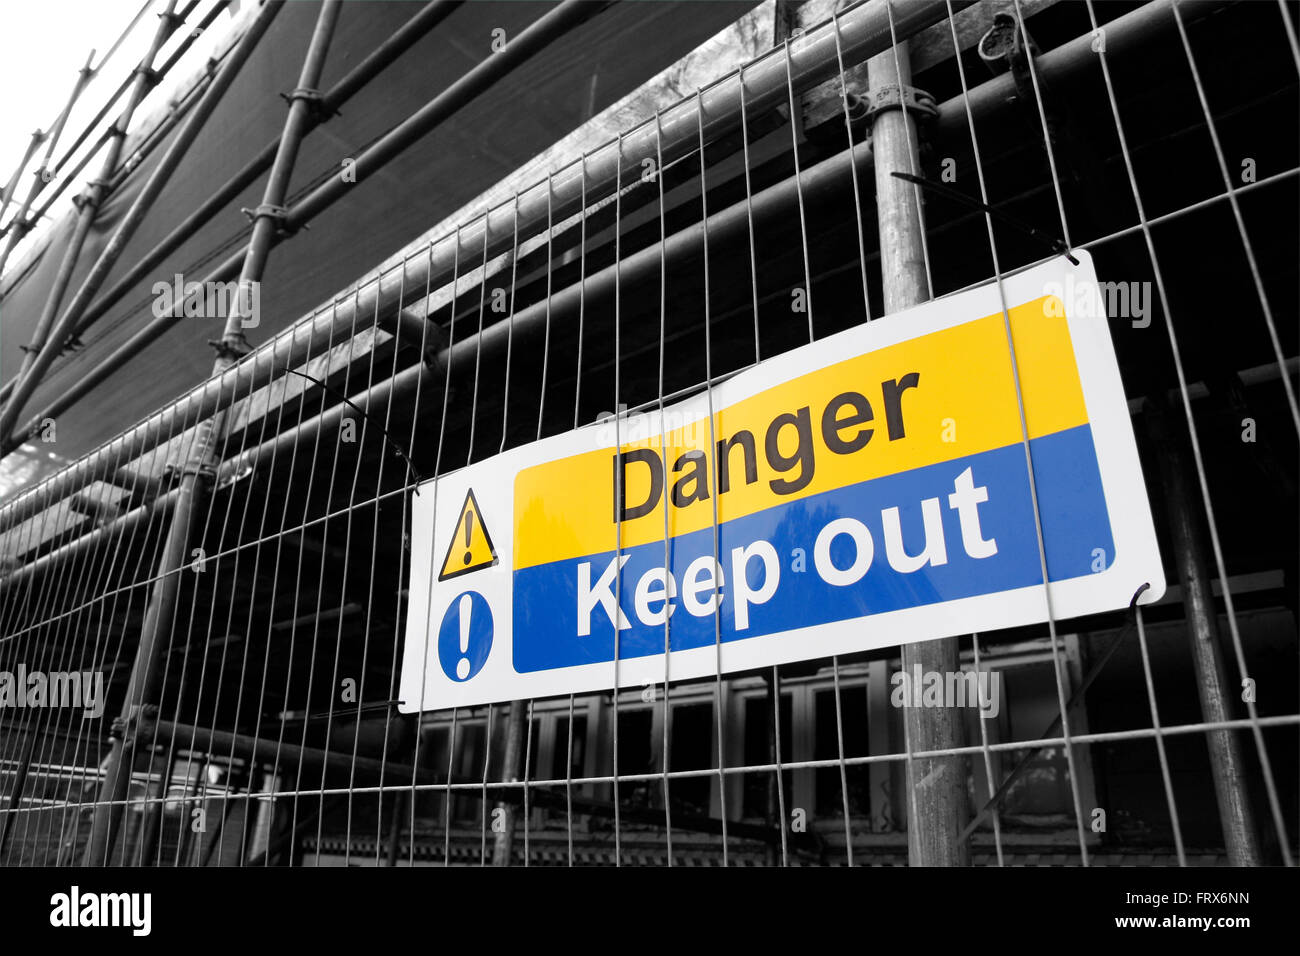 Danger Keep Out sign with black and white background Stock Photo